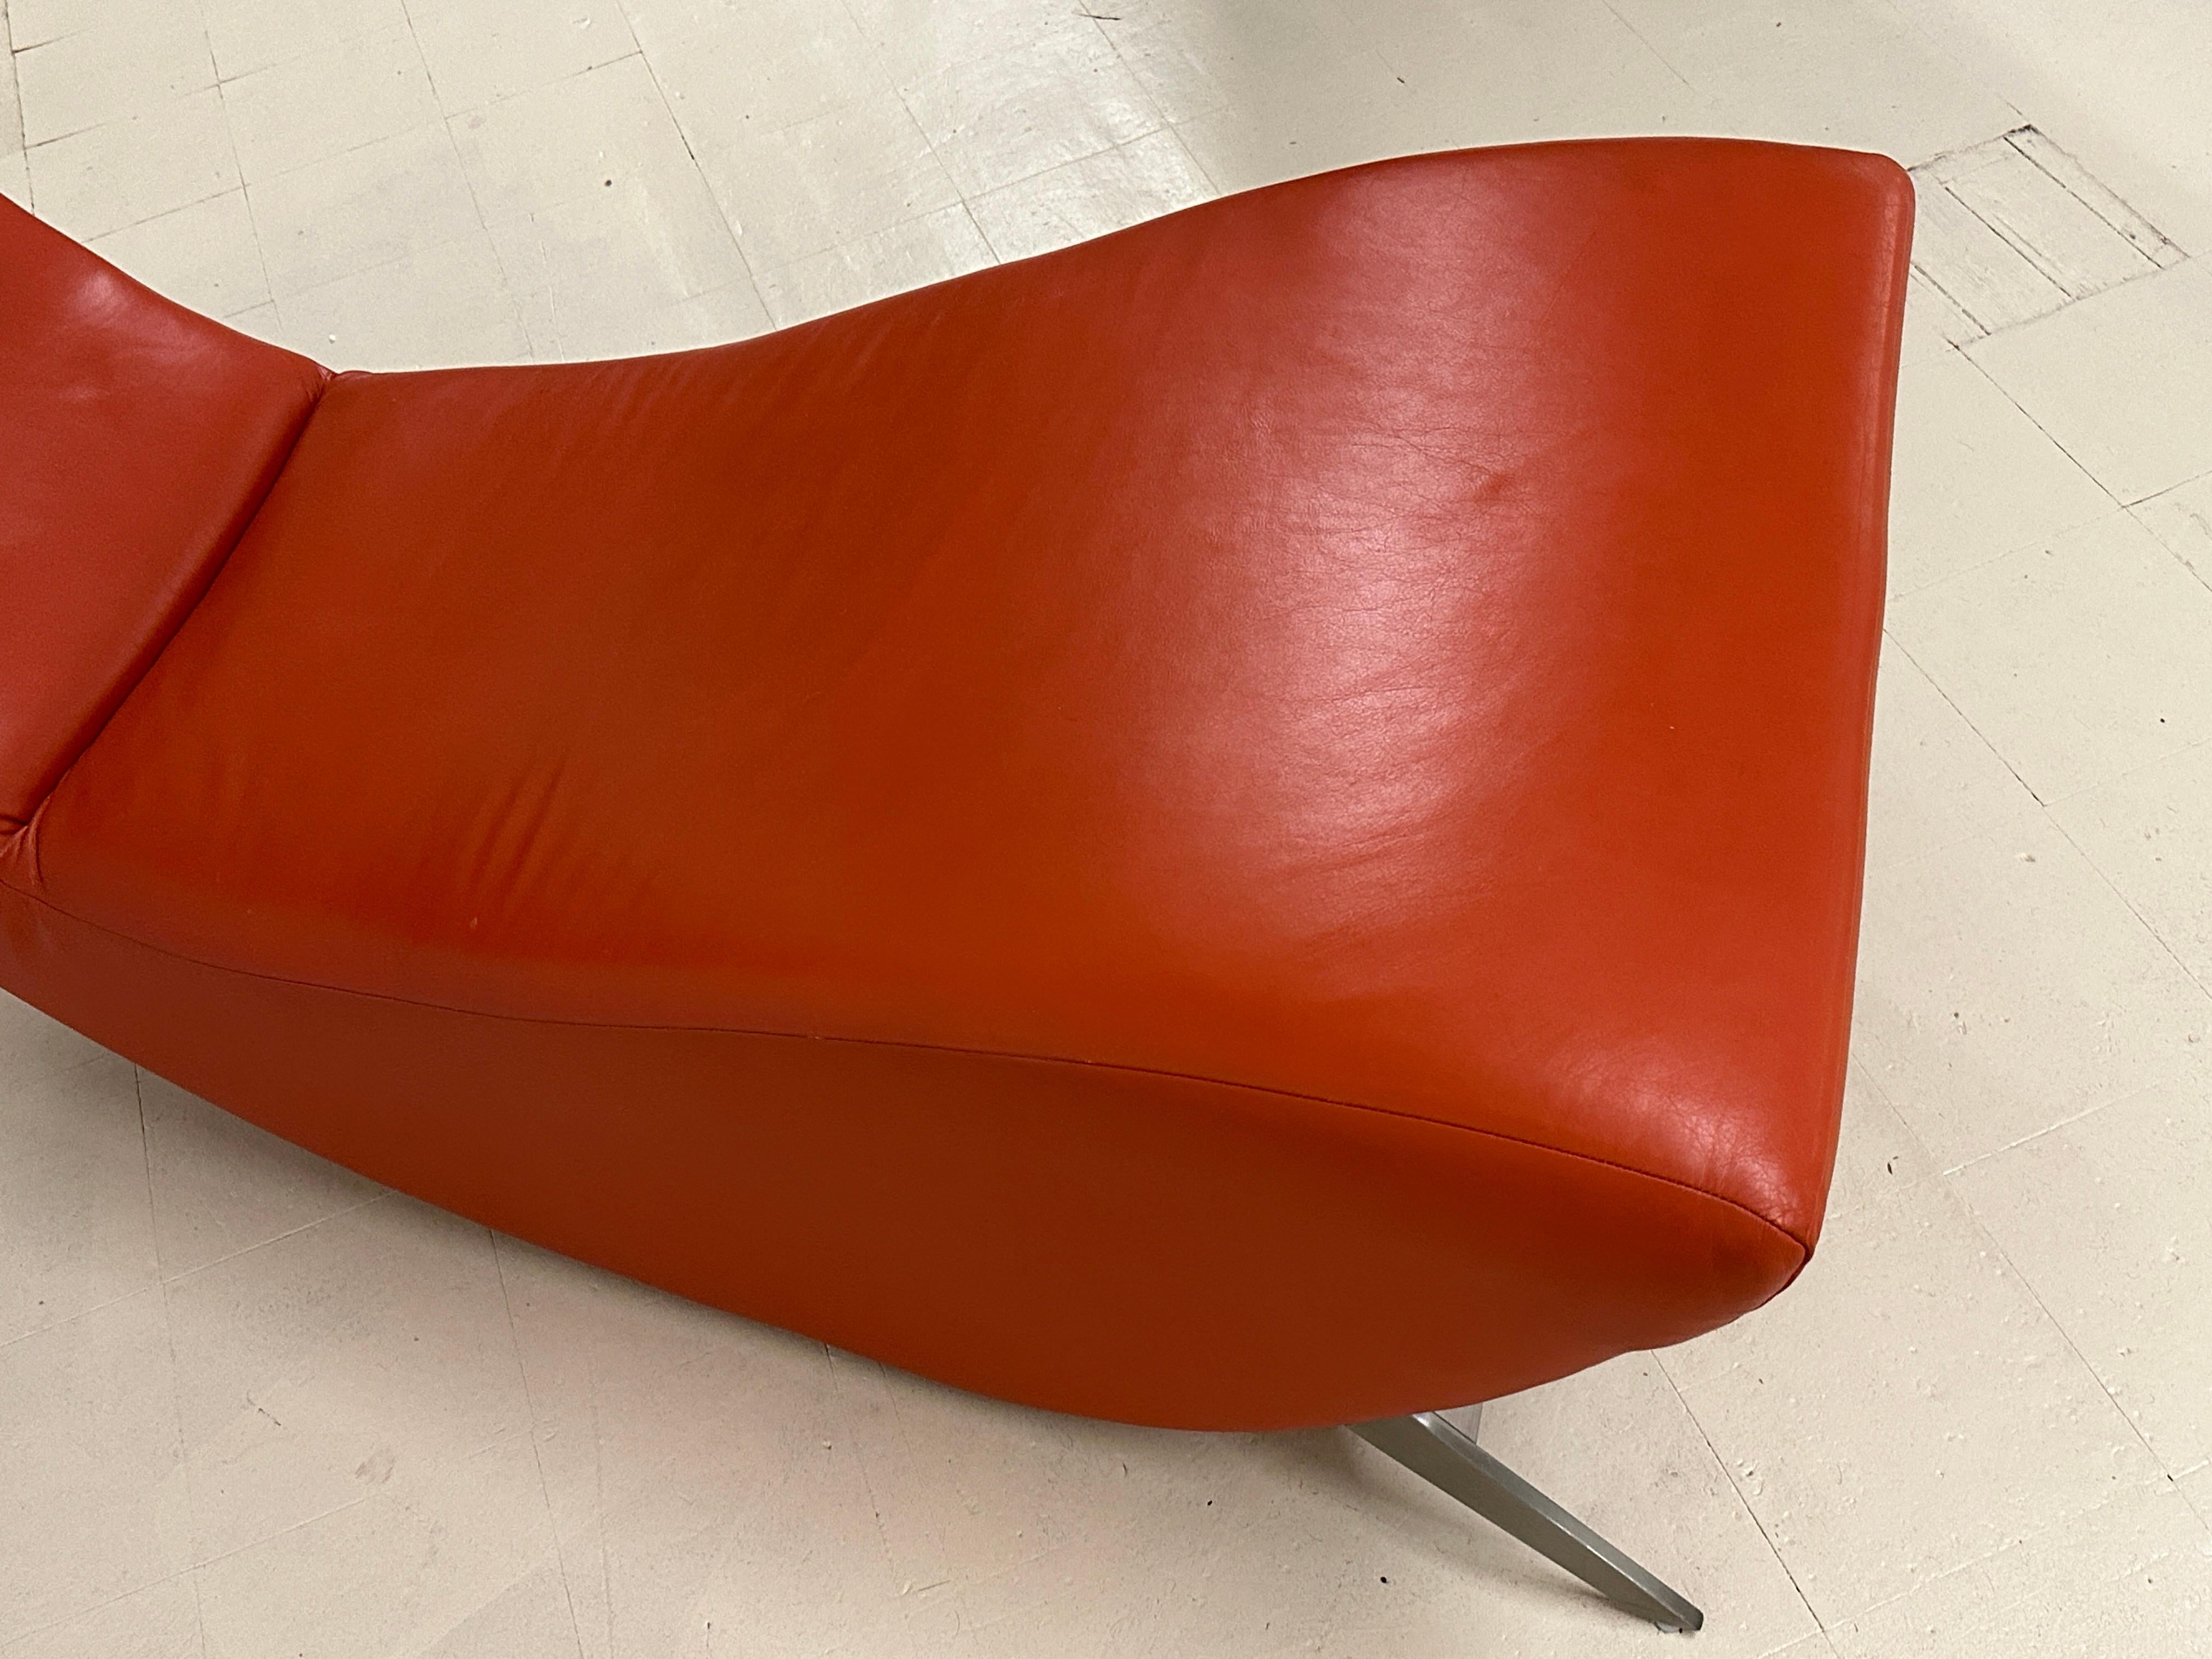 Brushed Sculptural Vermilion Leather Chaise Longue by Stanley Jay Freidman for Brueton For Sale